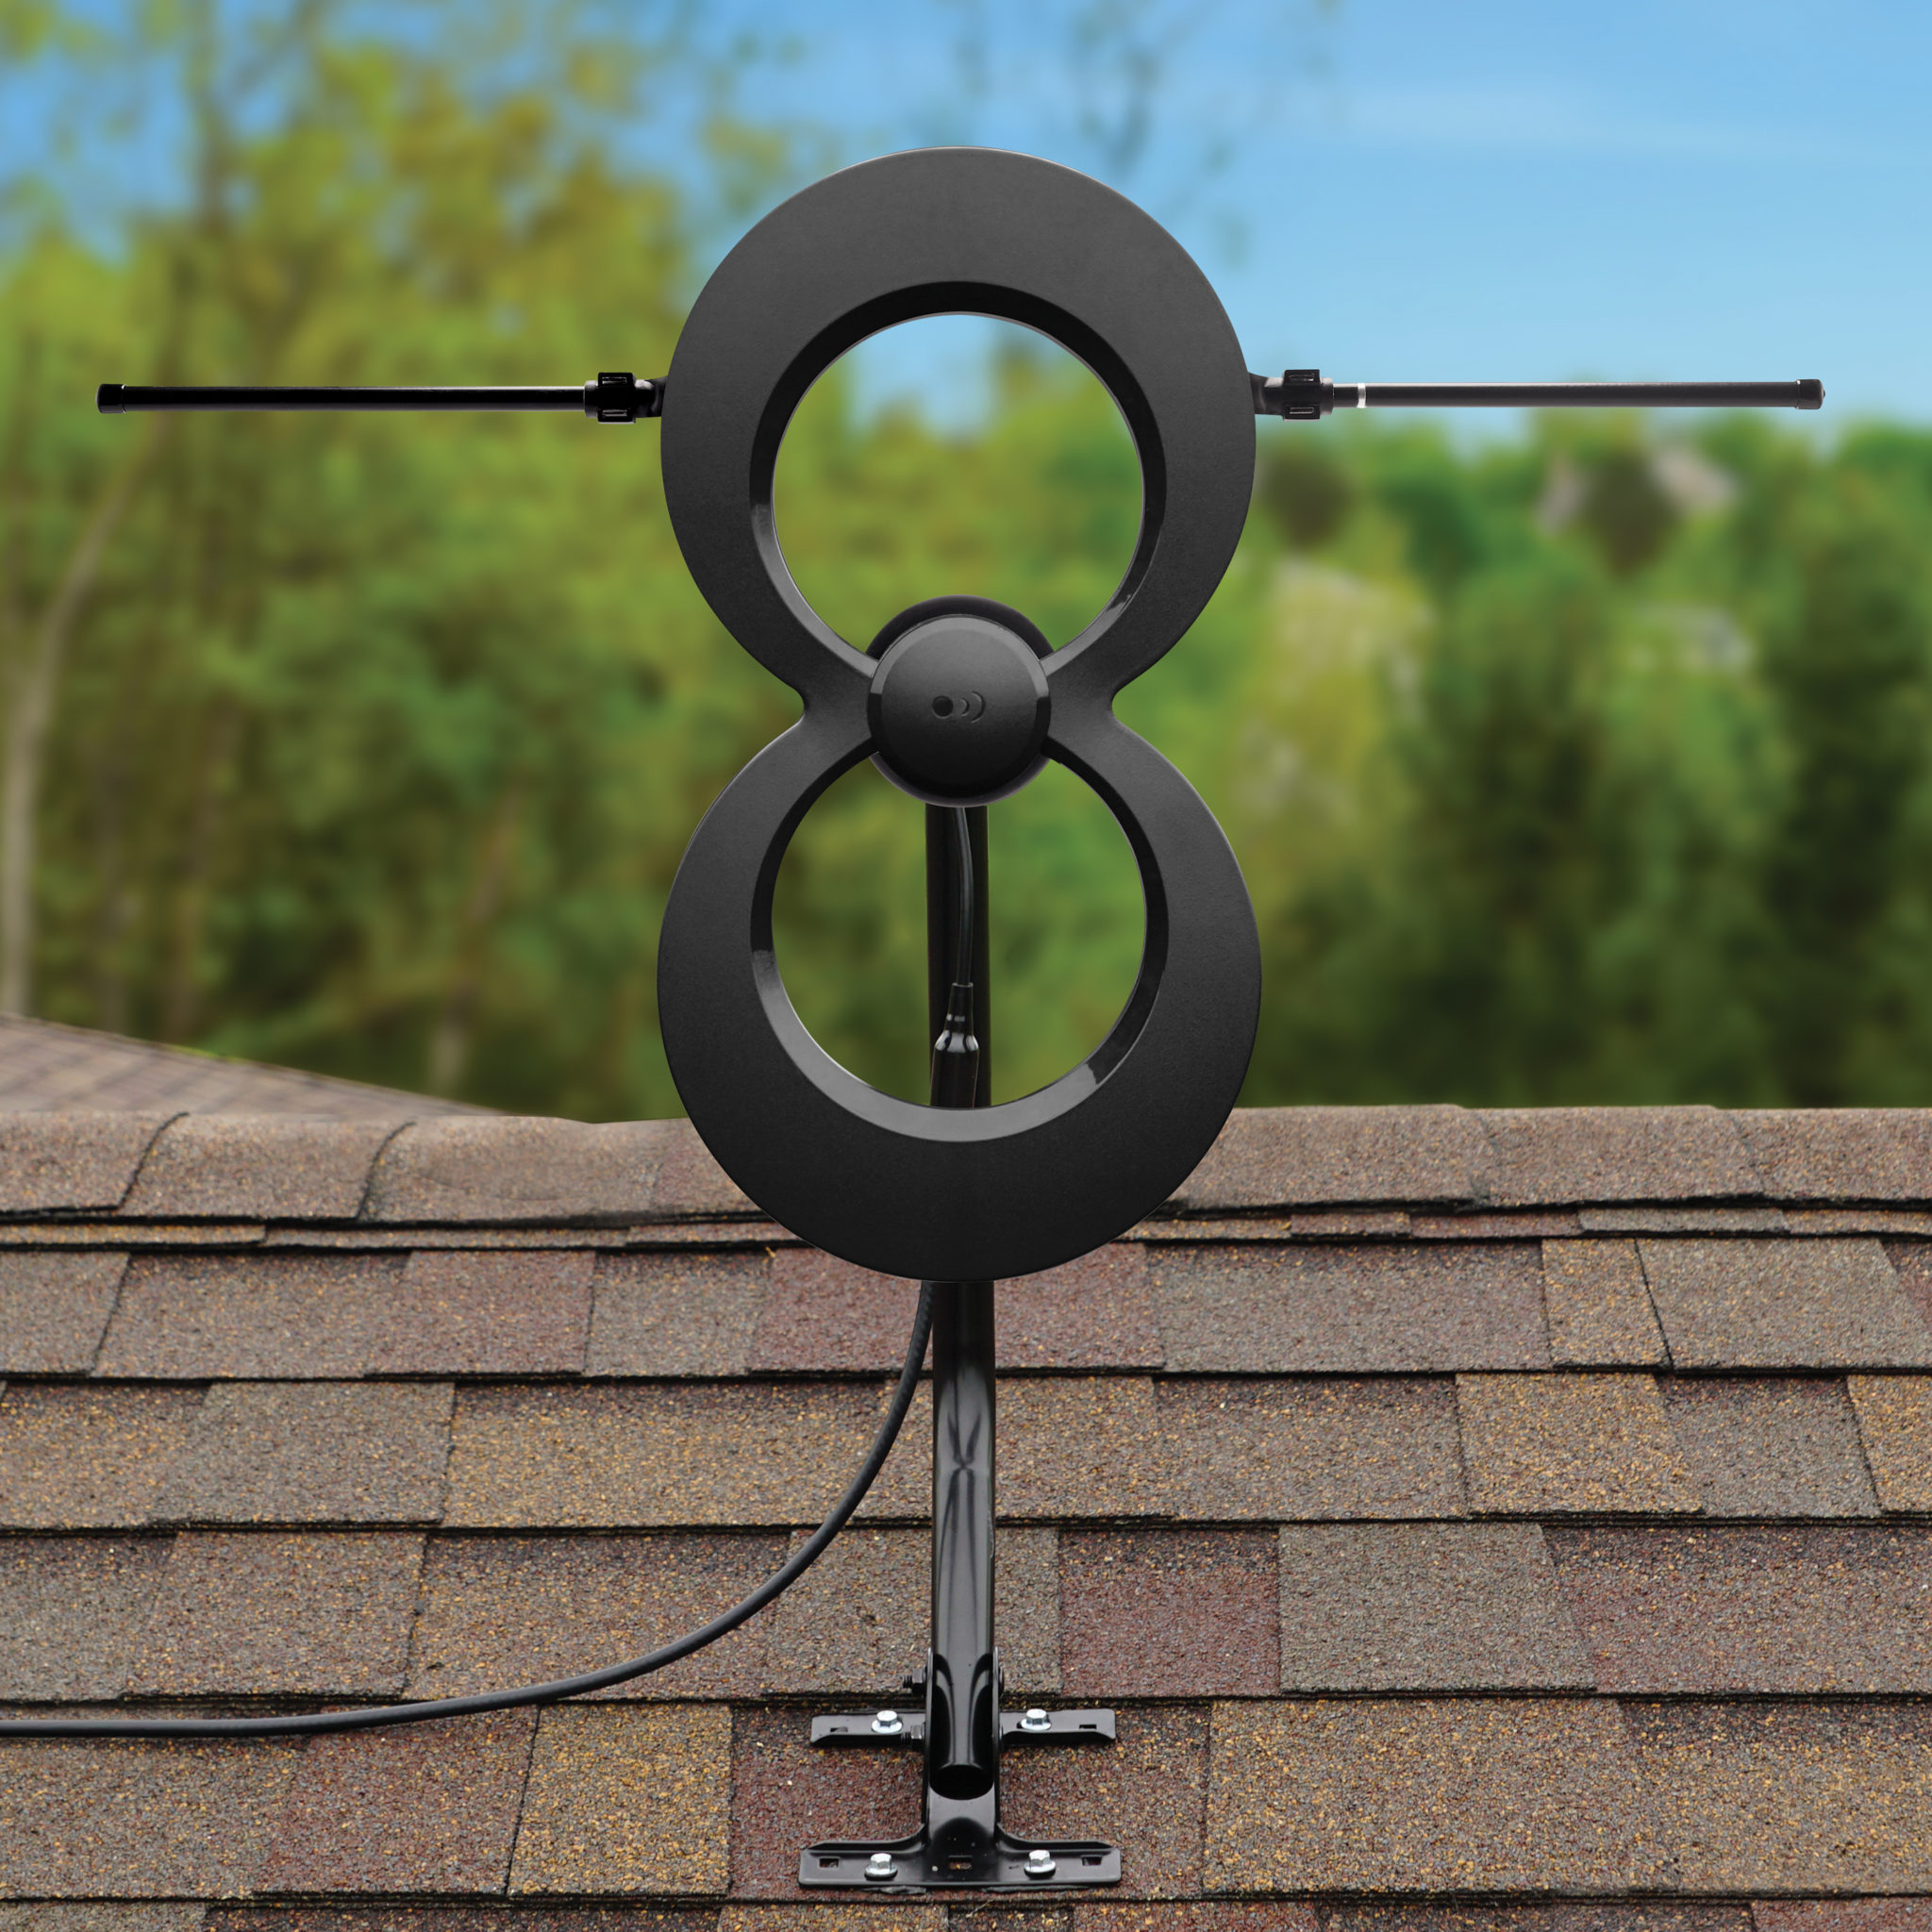 Looking for a New Antenna? Try the New ClearStream MAX-V